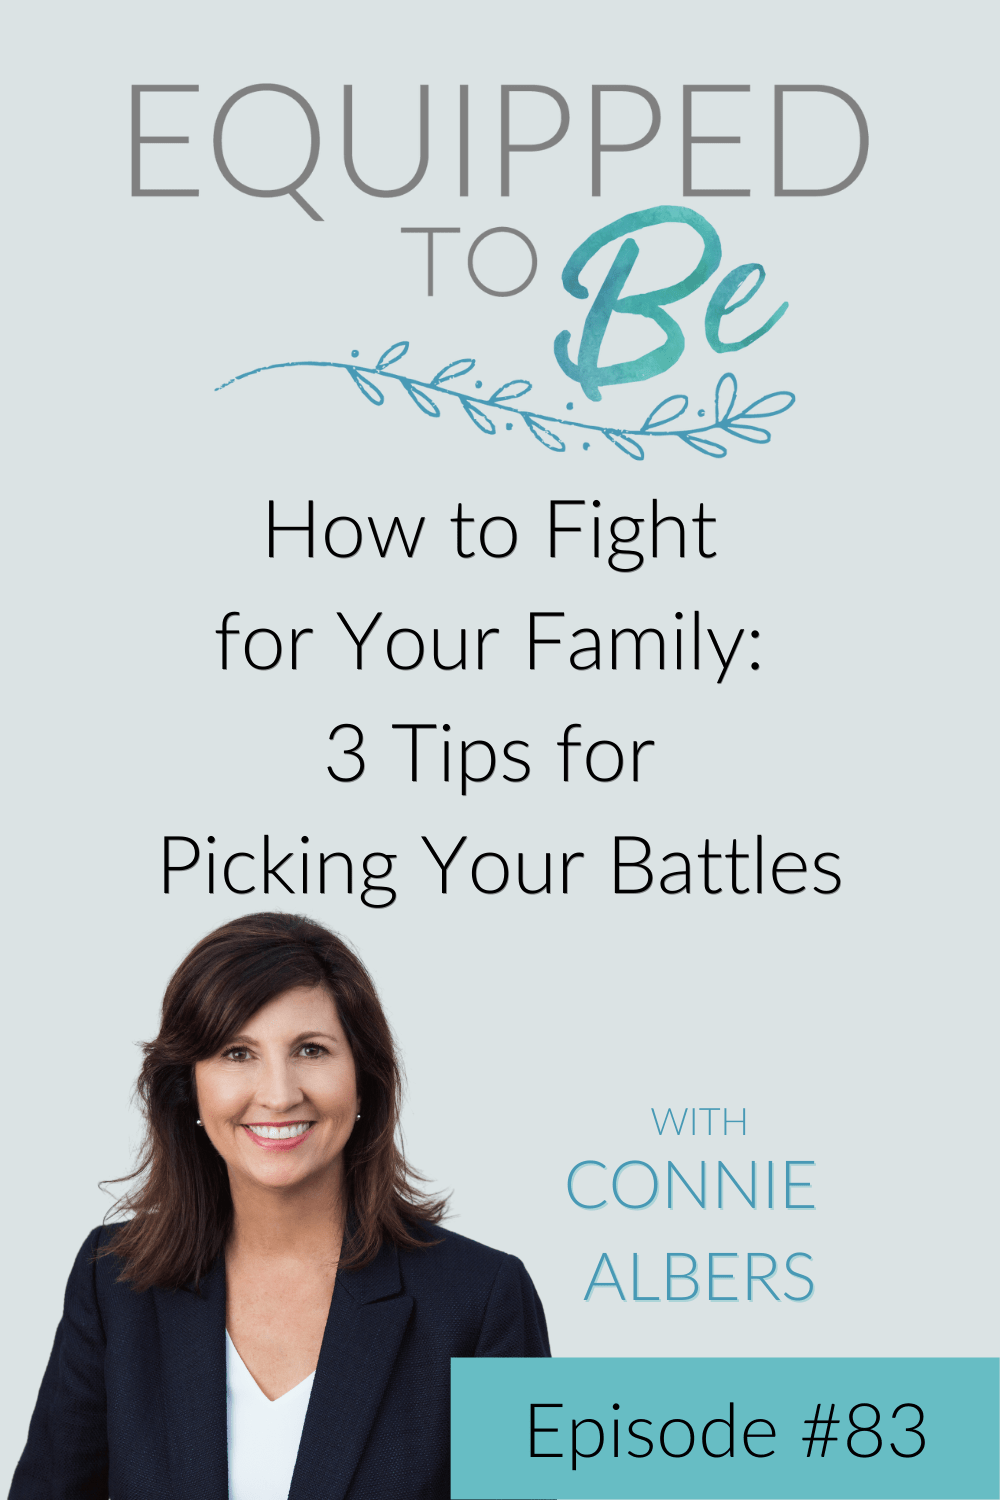 How to Fight for Your Family: 3 Tips for Picking Your Battles - ETB #83